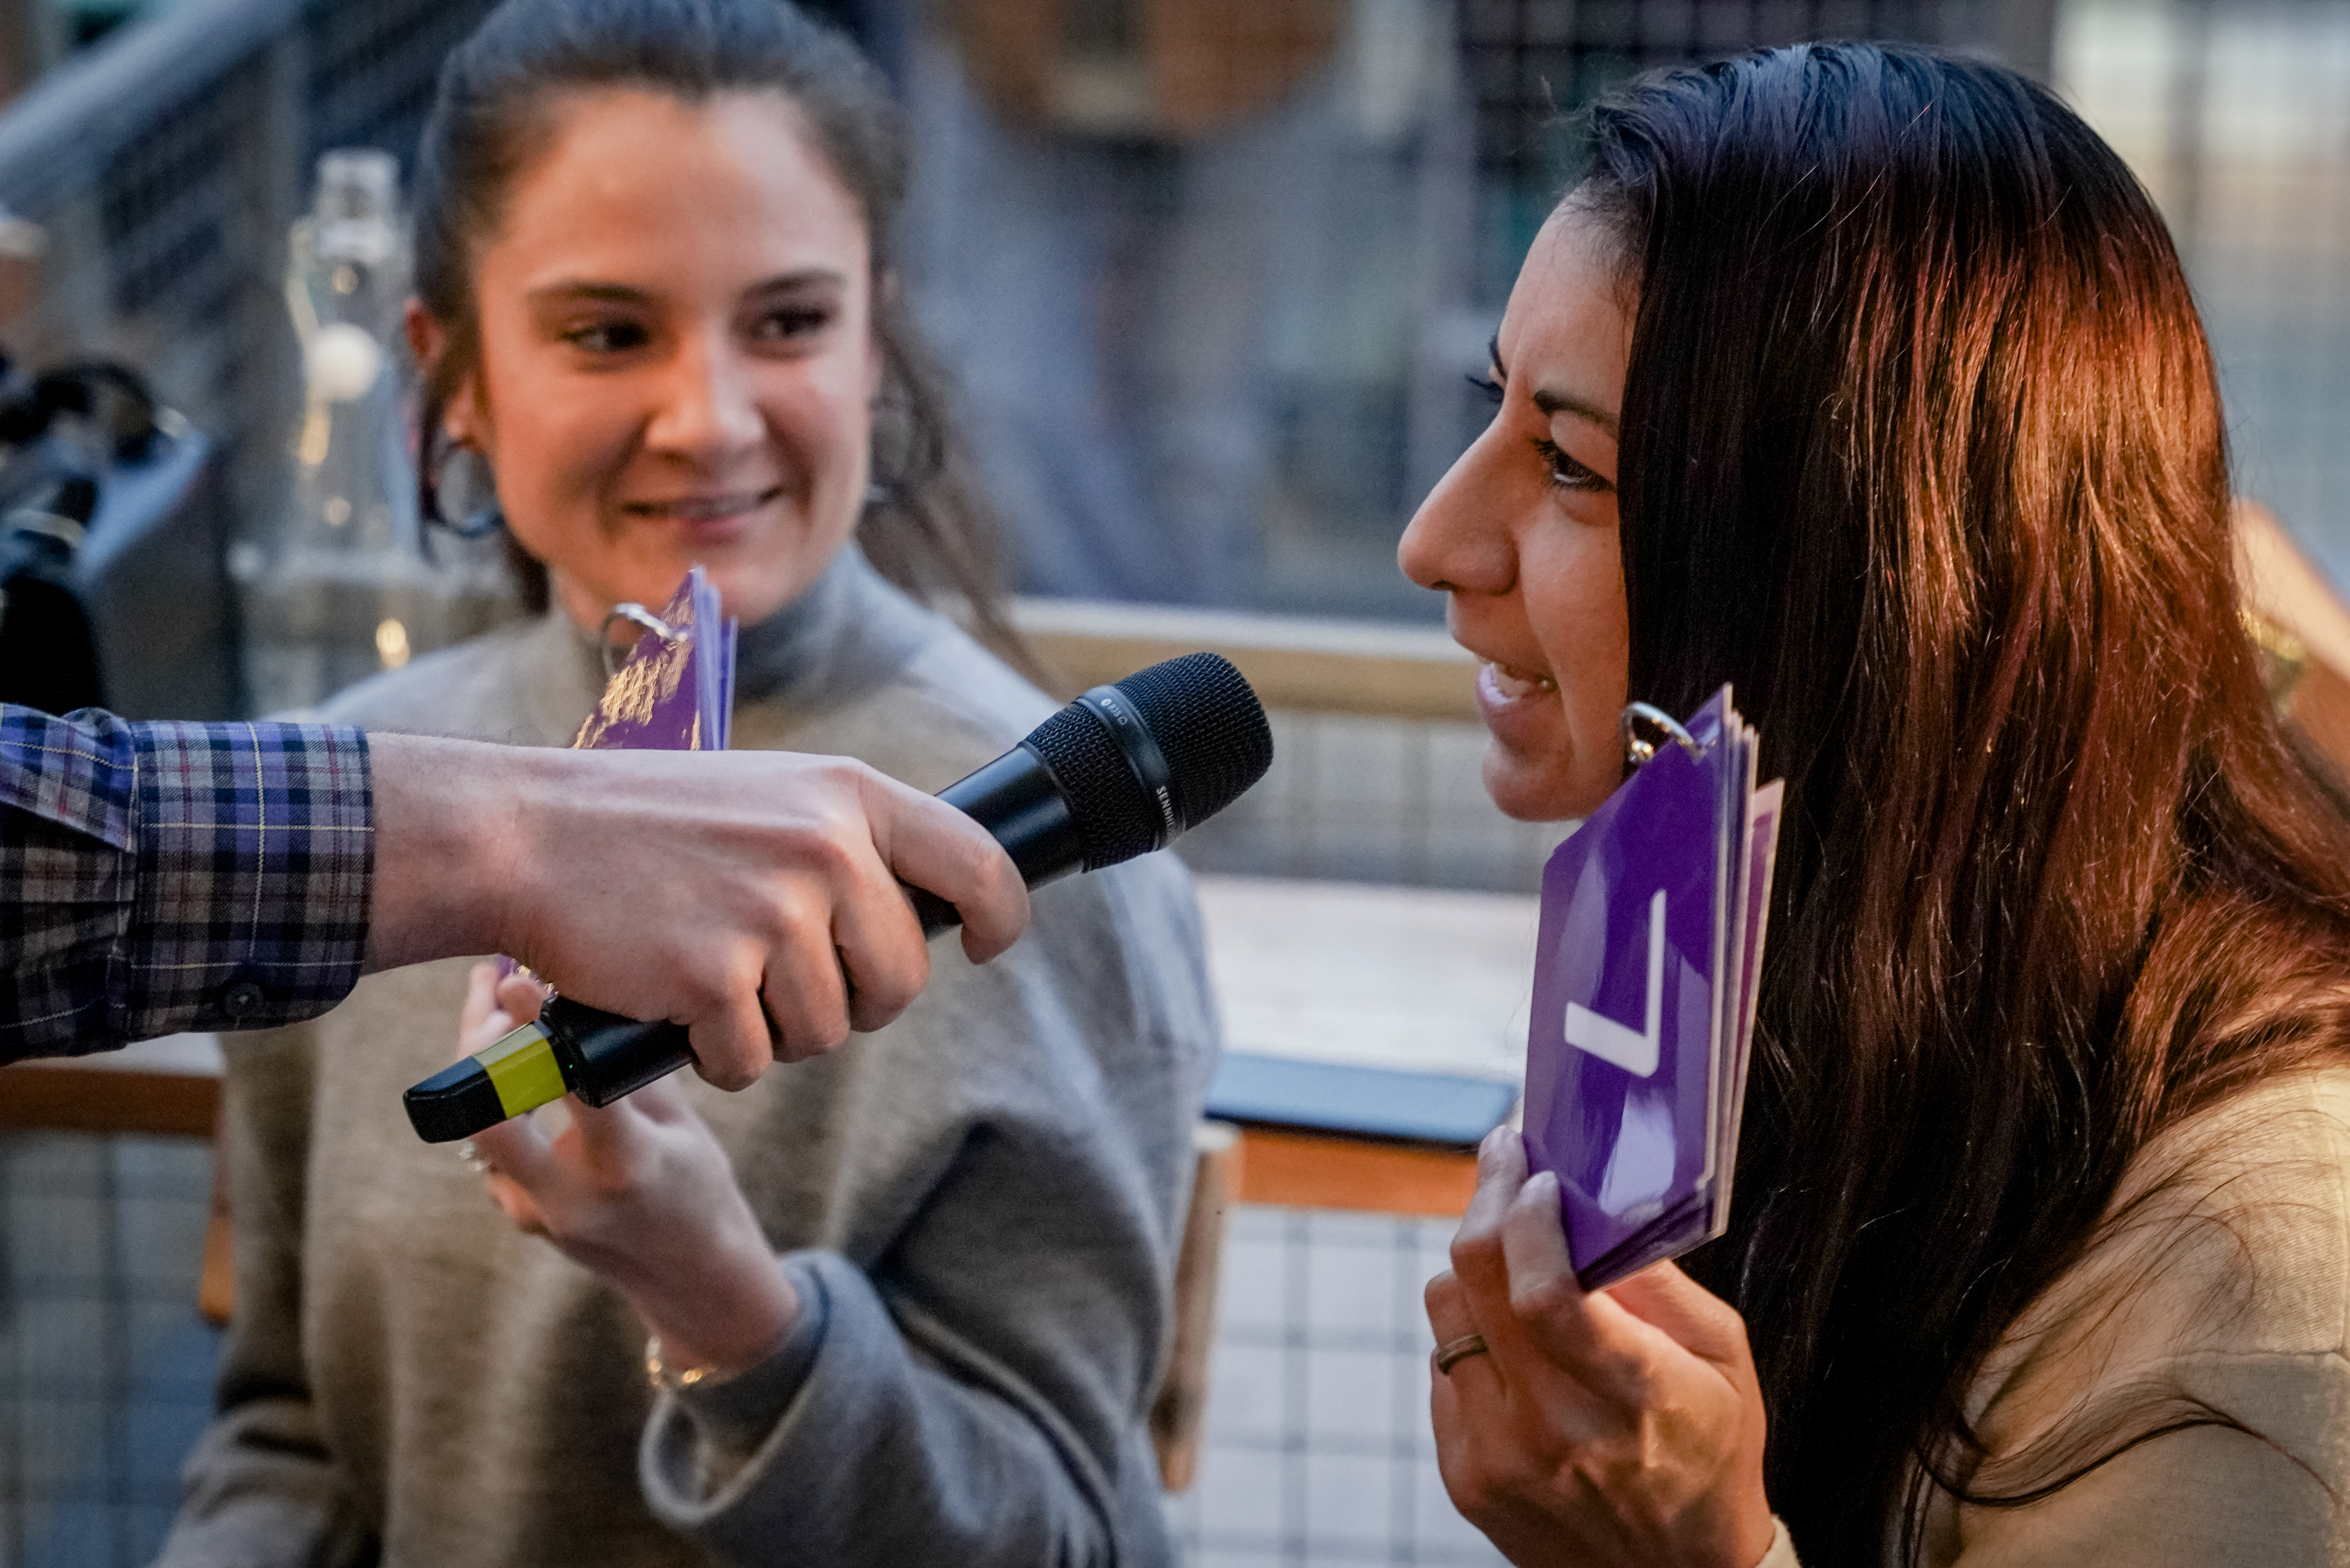 A woman speaking into a microphone, her friend smiling